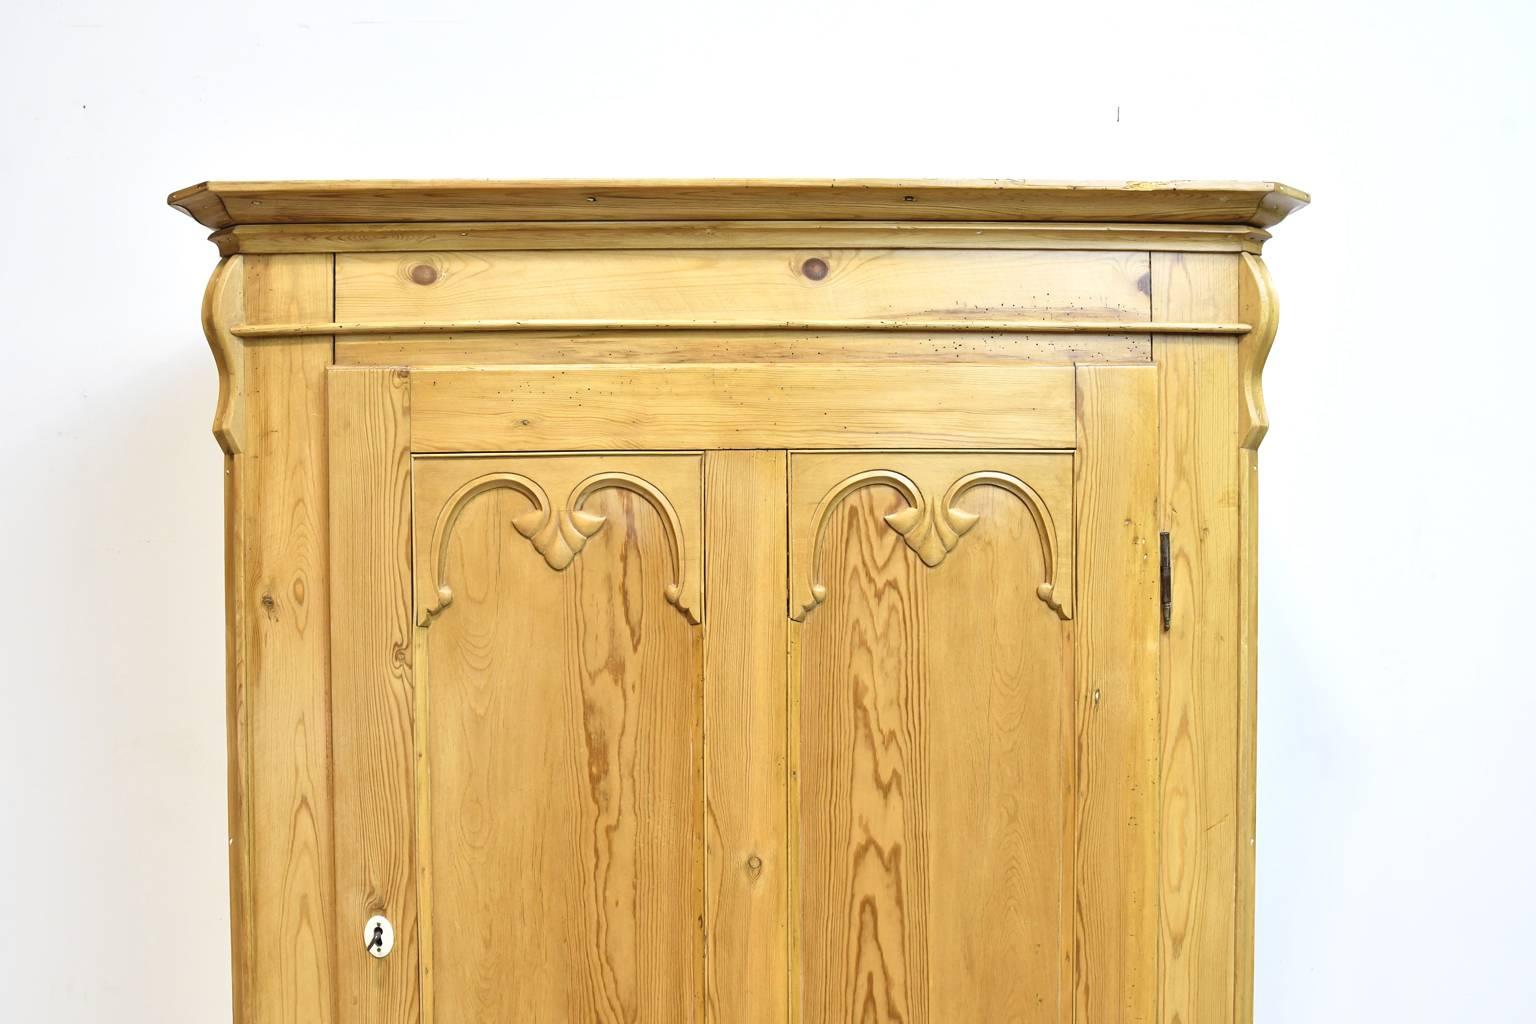 Hand-Crafted Pine Armoire w/ Single Door & Two Drawers, Denmark, c. 1835